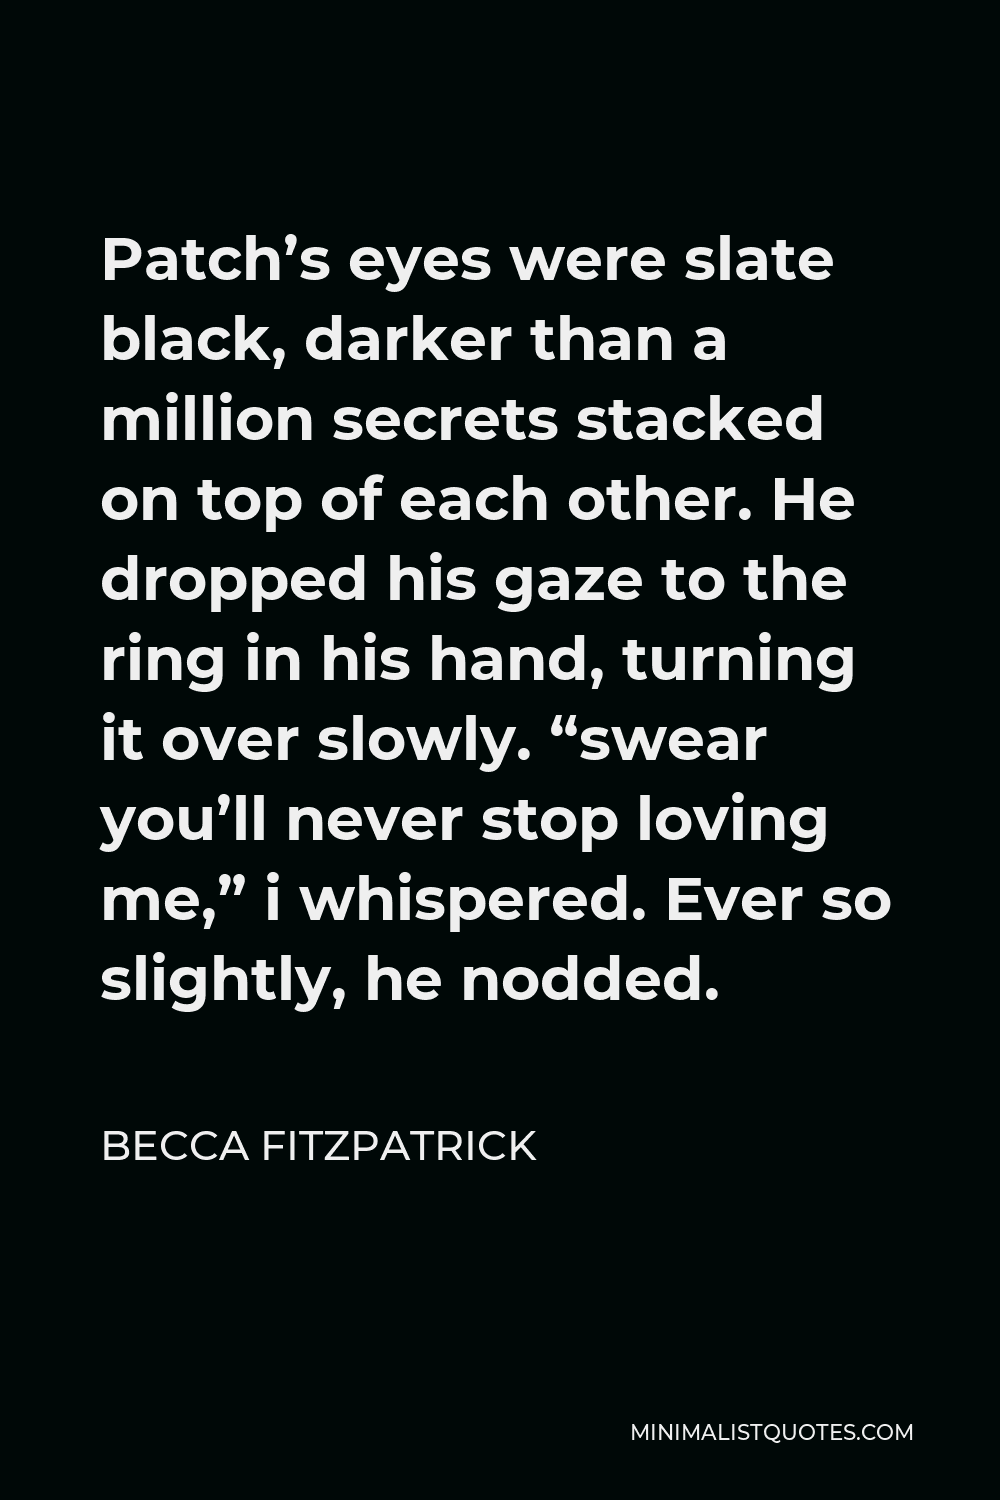 Becca Fitzpatrick Quote - Patch’s eyes were slate black, darker than a million secrets stacked on top of each other. He dropped his gaze to the ring in his hand, turning it over slowly. “swear you’ll never stop loving me,” i whispered. Ever so slightly, he nodded.